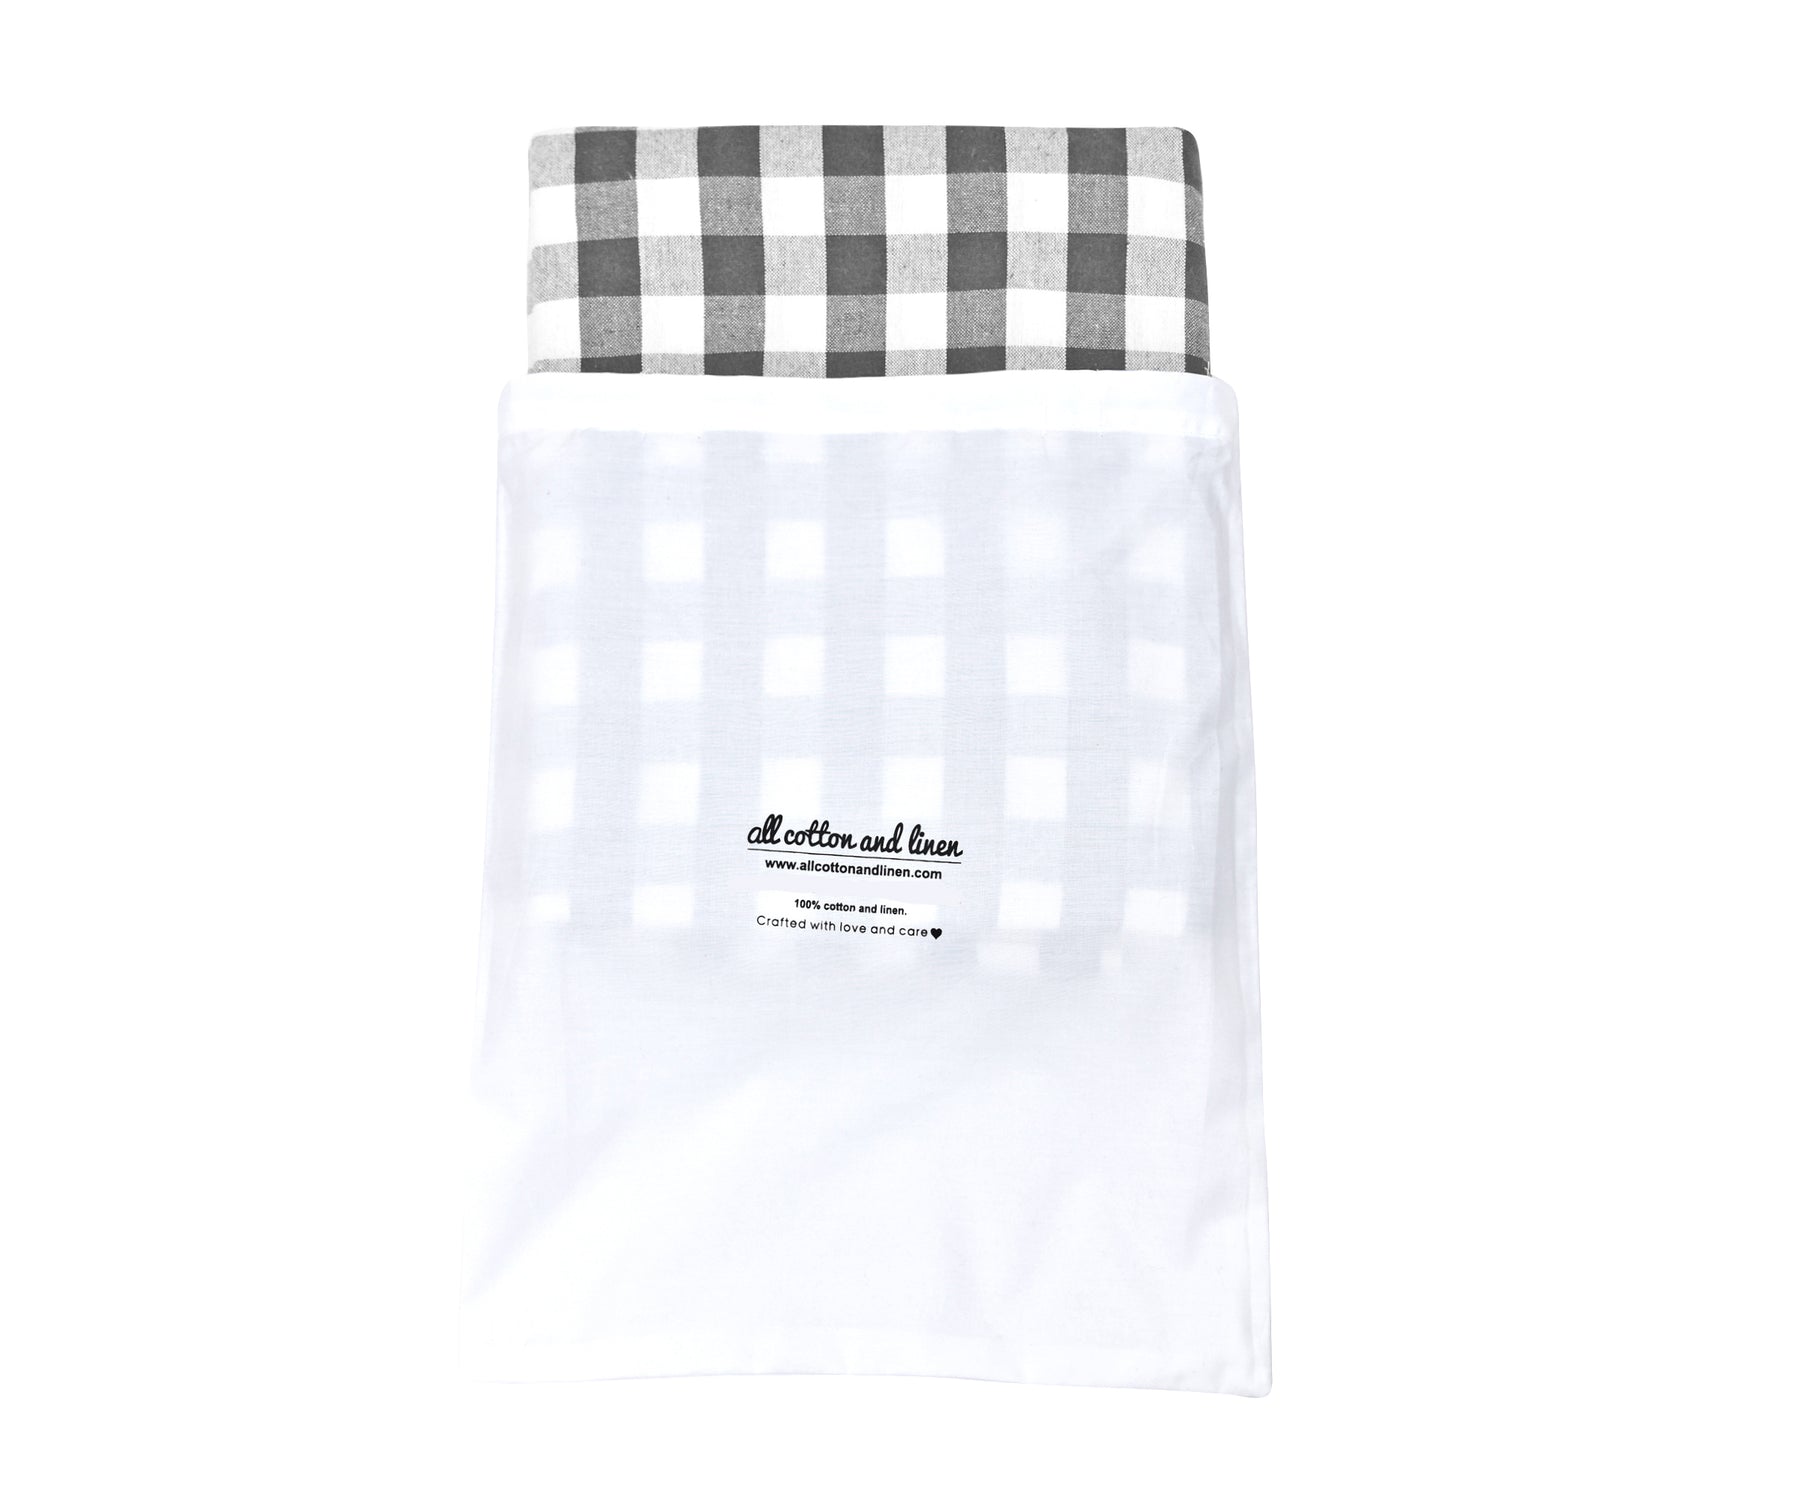 Farmhouse tablecloth with rustic appeal, suitable for country decor.